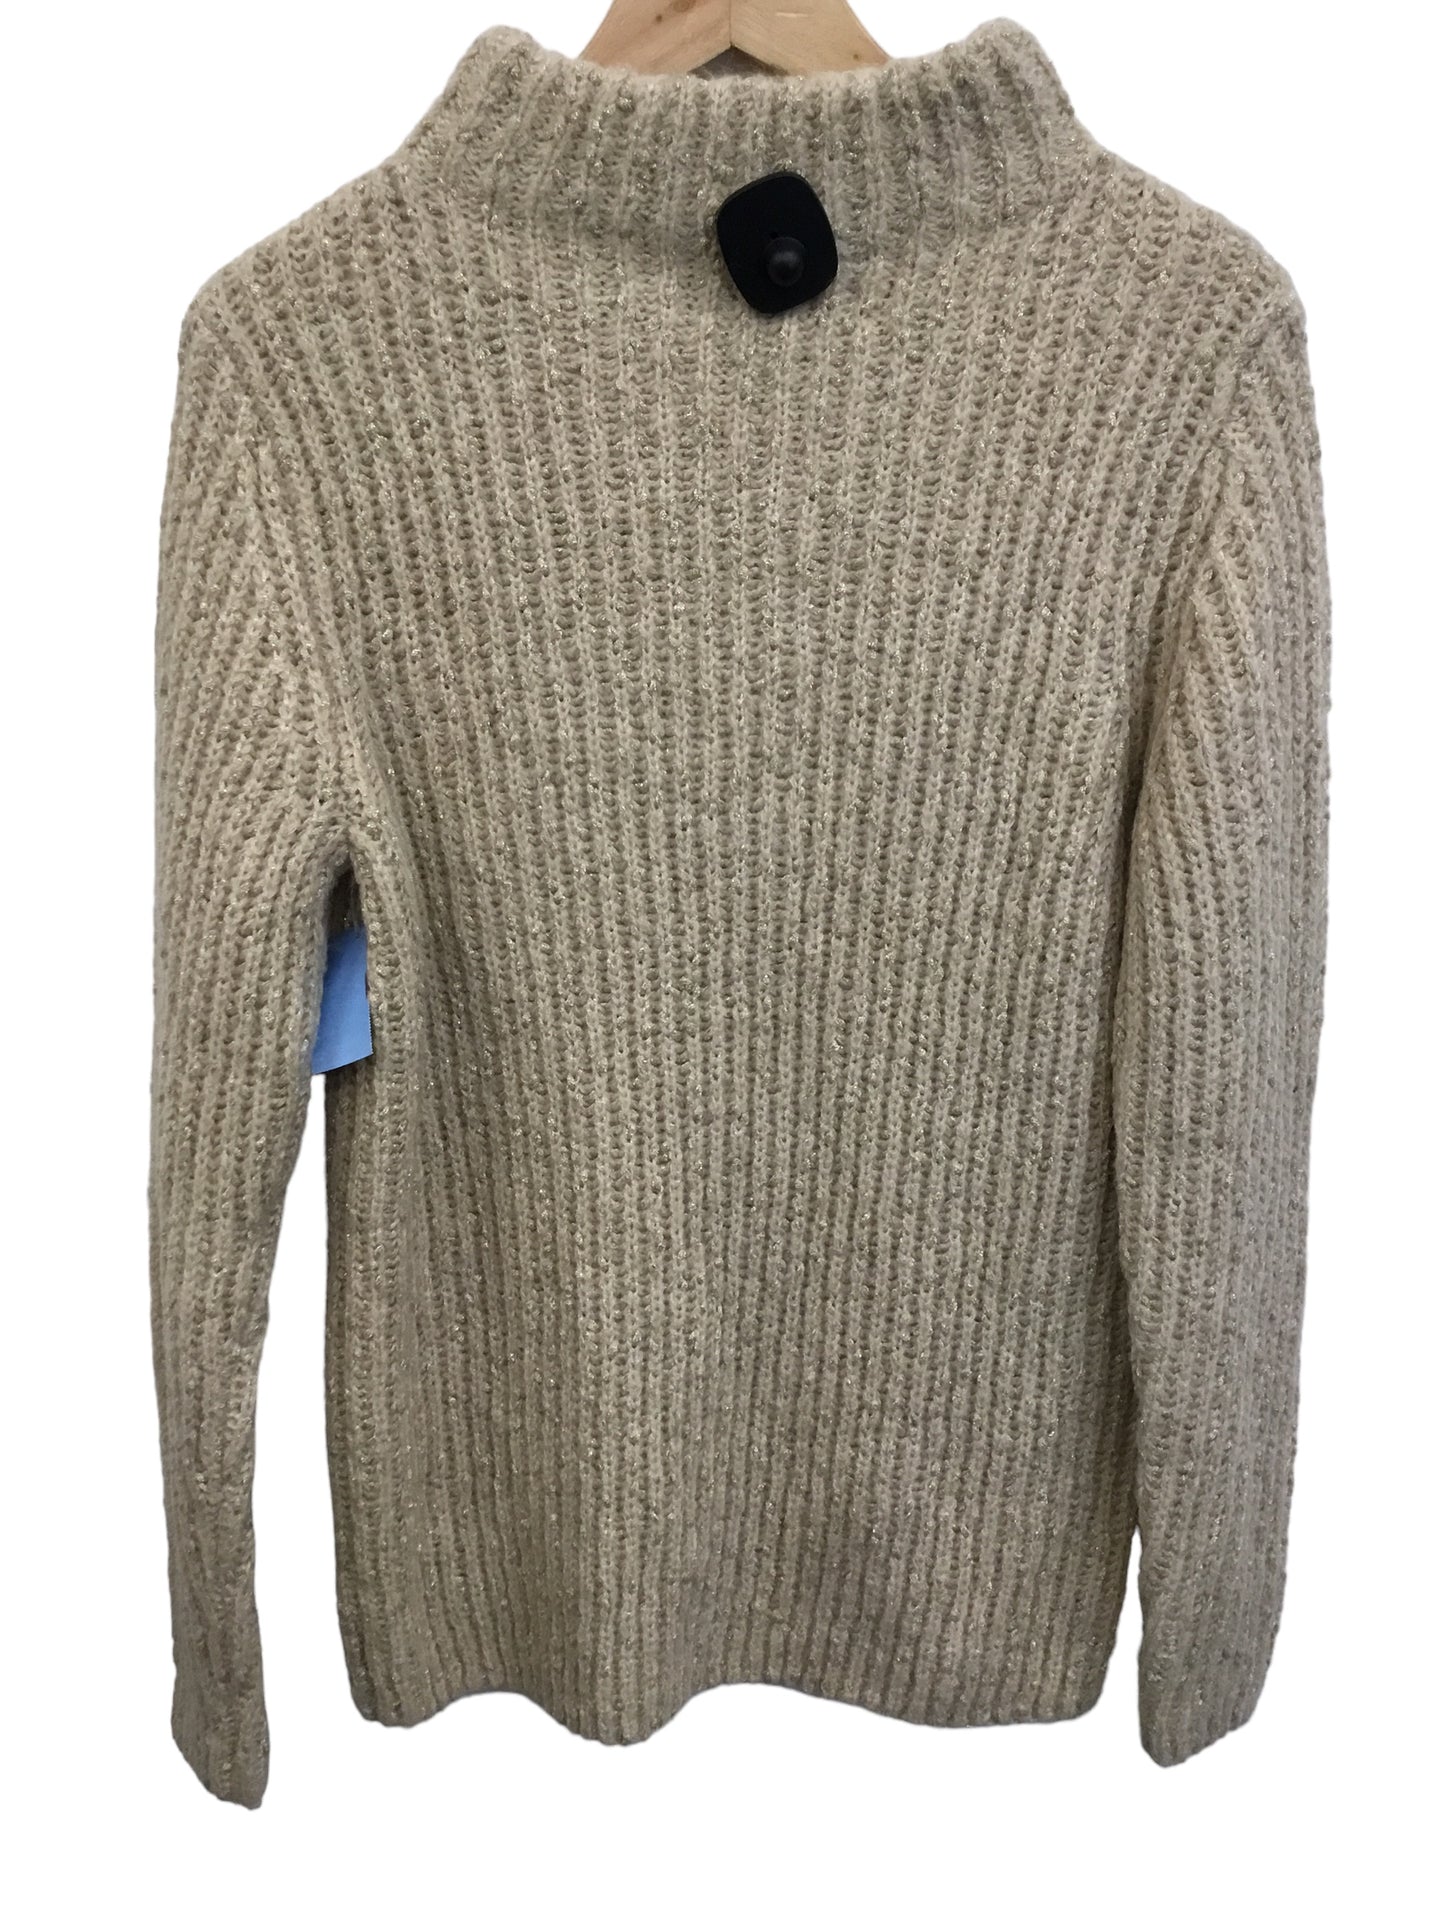 Sweater By Johnston & Murphy  Size: S